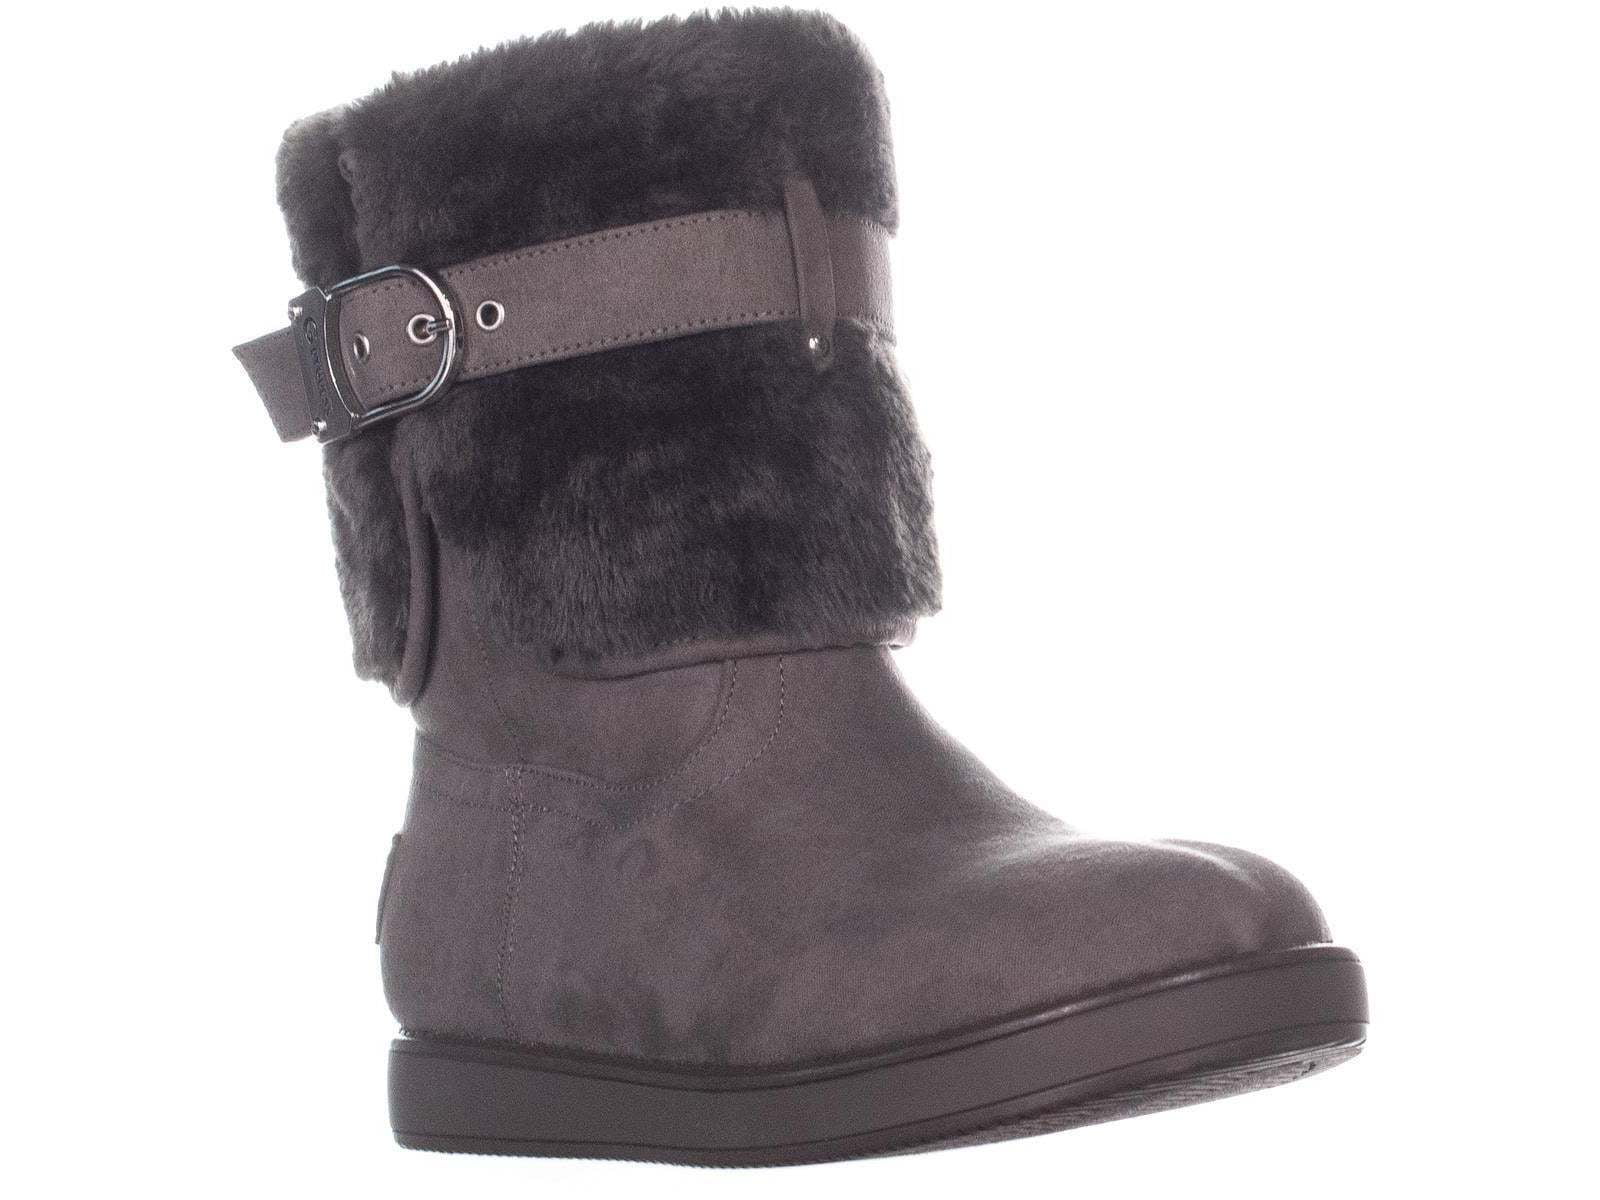 Andrew Halliday Forskelsbehandling Sindssyge G by Guess Womens Aussie Closed Toe Ankle Cold Weather Boots, Black, Size  6.0 - Walmart.com